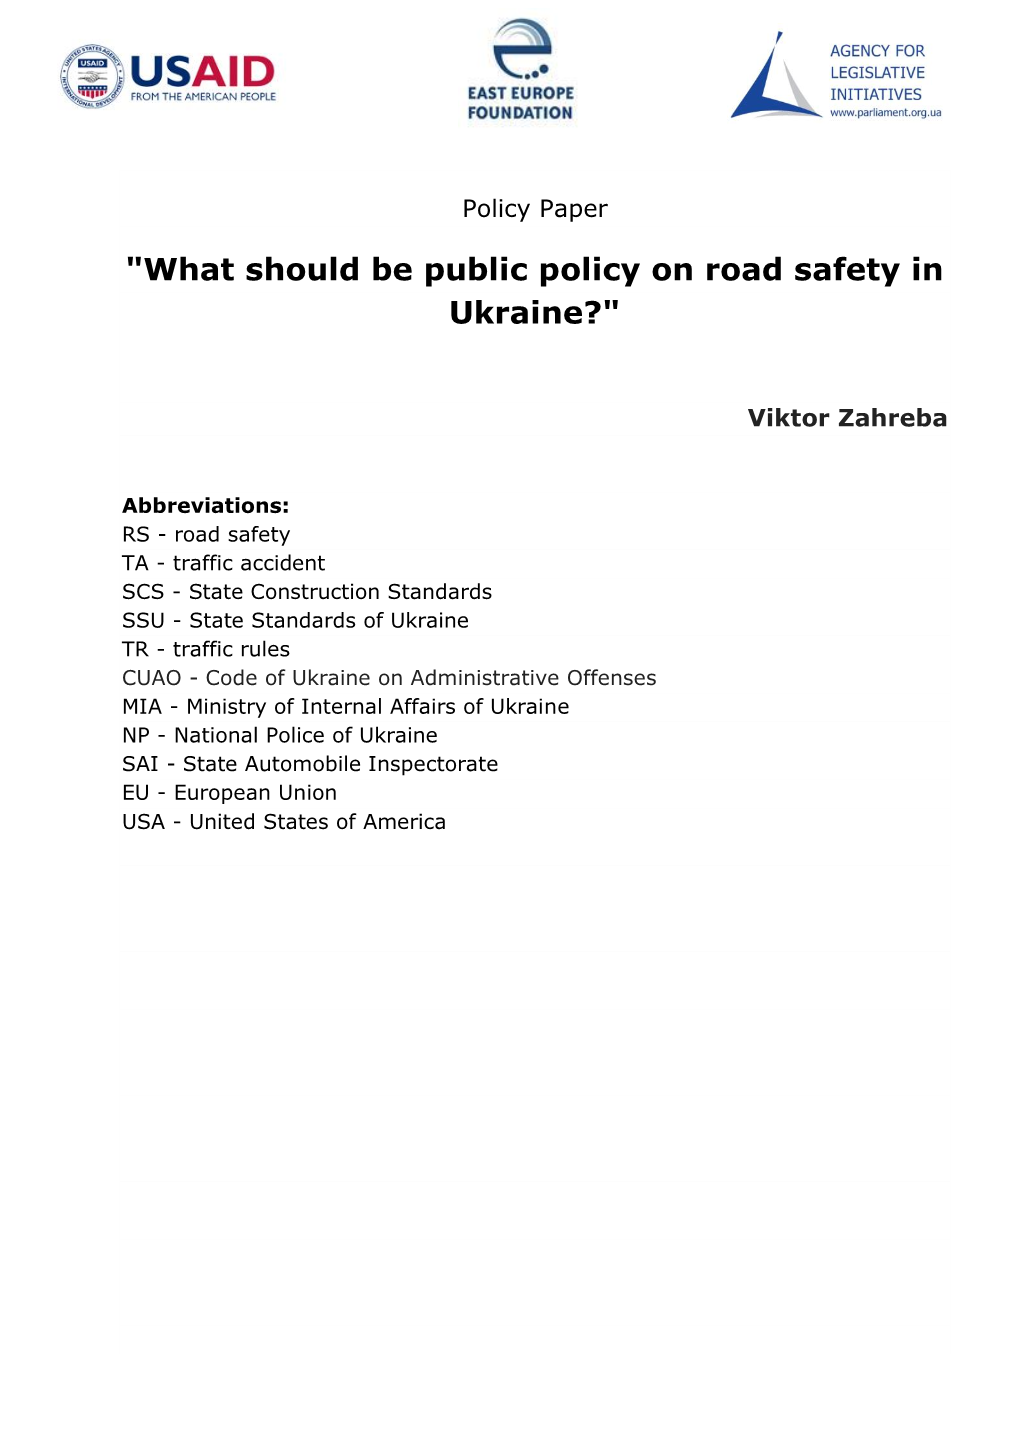 "What Should Be Public Policy on Road Safety in Ukraine?"